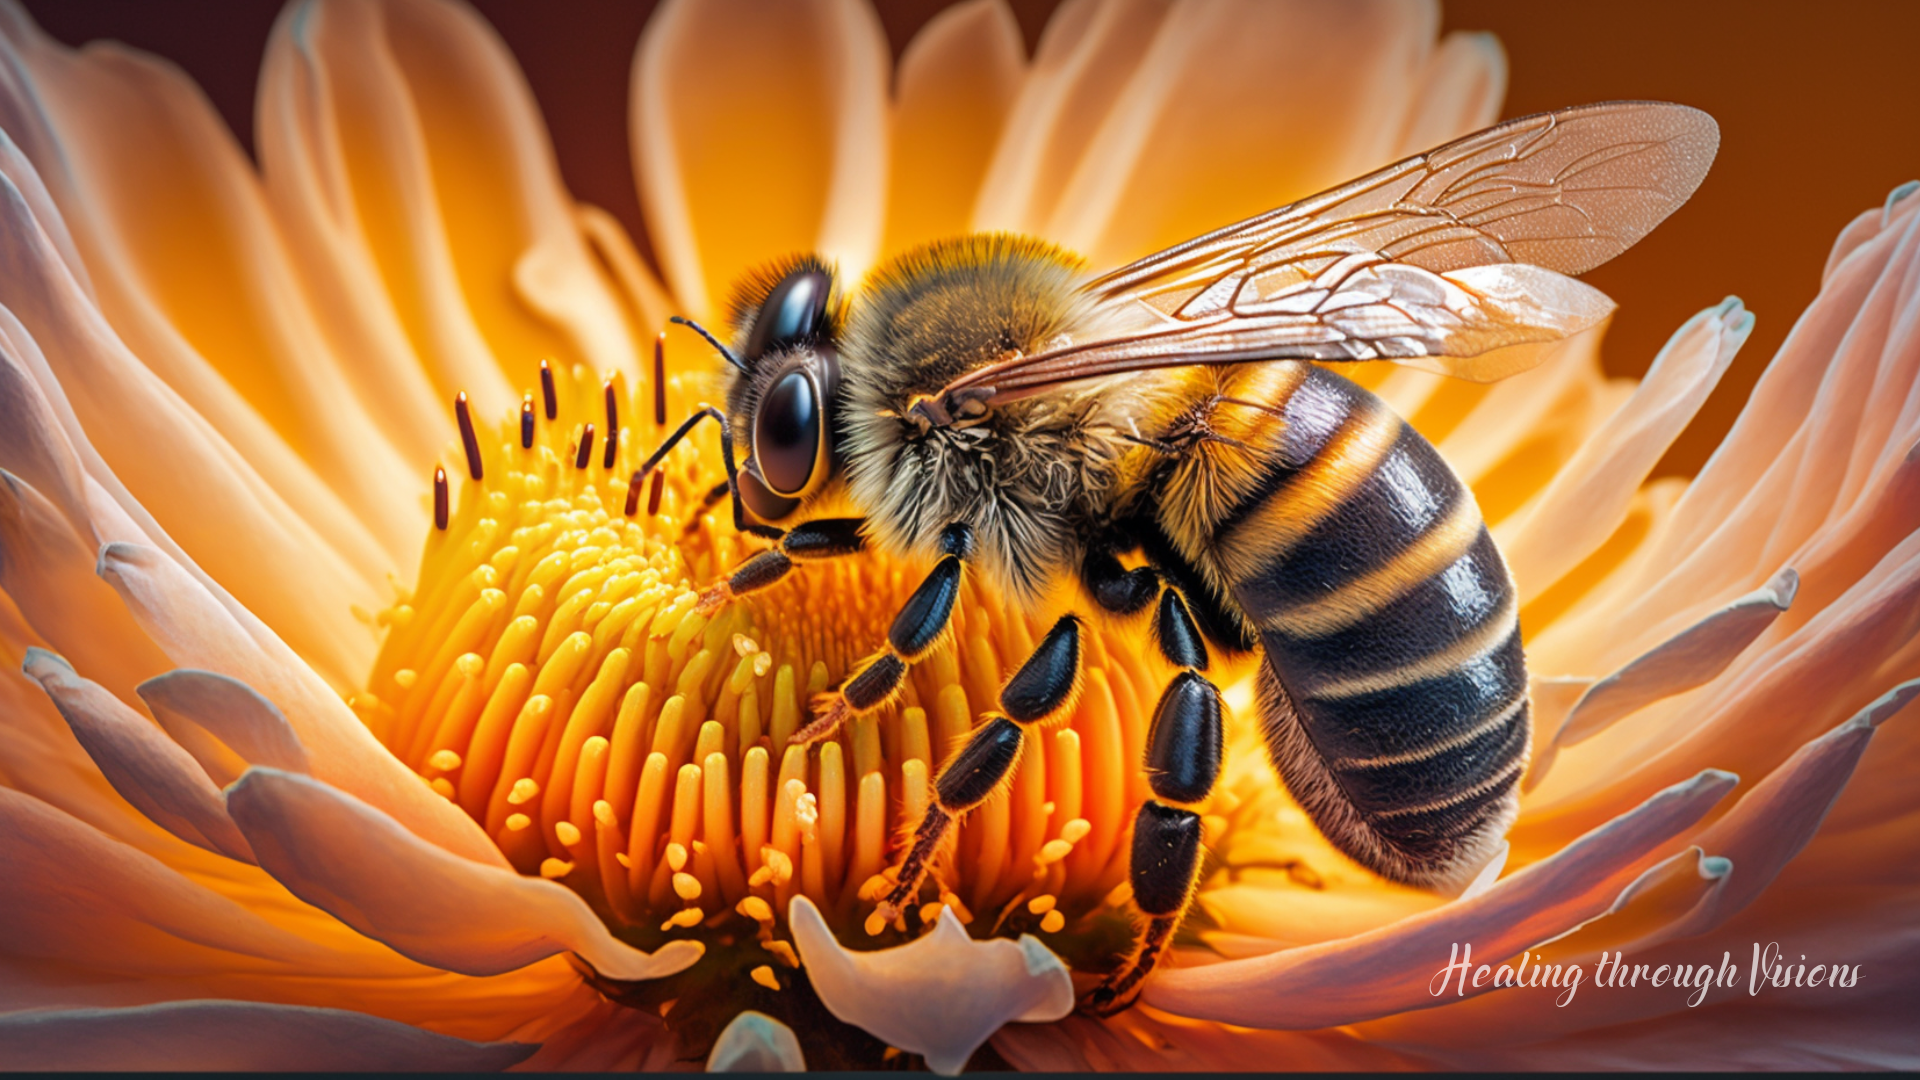 The image depicts a magical scene in which a honey bee hovers over a beautiful flower, dropping its pollen onto the delicate petals. The bee is shown in exquisite detail, with its wings and stripes glistening in the sunlight. The flower is equally beautiful, with its petals unfurled and radiating a vibrant energy and light. The image is suffused with a sense of magic and wonder, with the bee and the flower representing the interconnectedness of all living things and the power of nature to inspire and transform. The background is a lush, green meadow, teeming with life and buzzing with energy. The overall effect is one of enchantment and beauty, inviting the viewer to contemplate the miracle of life and the wonders of the natural world.